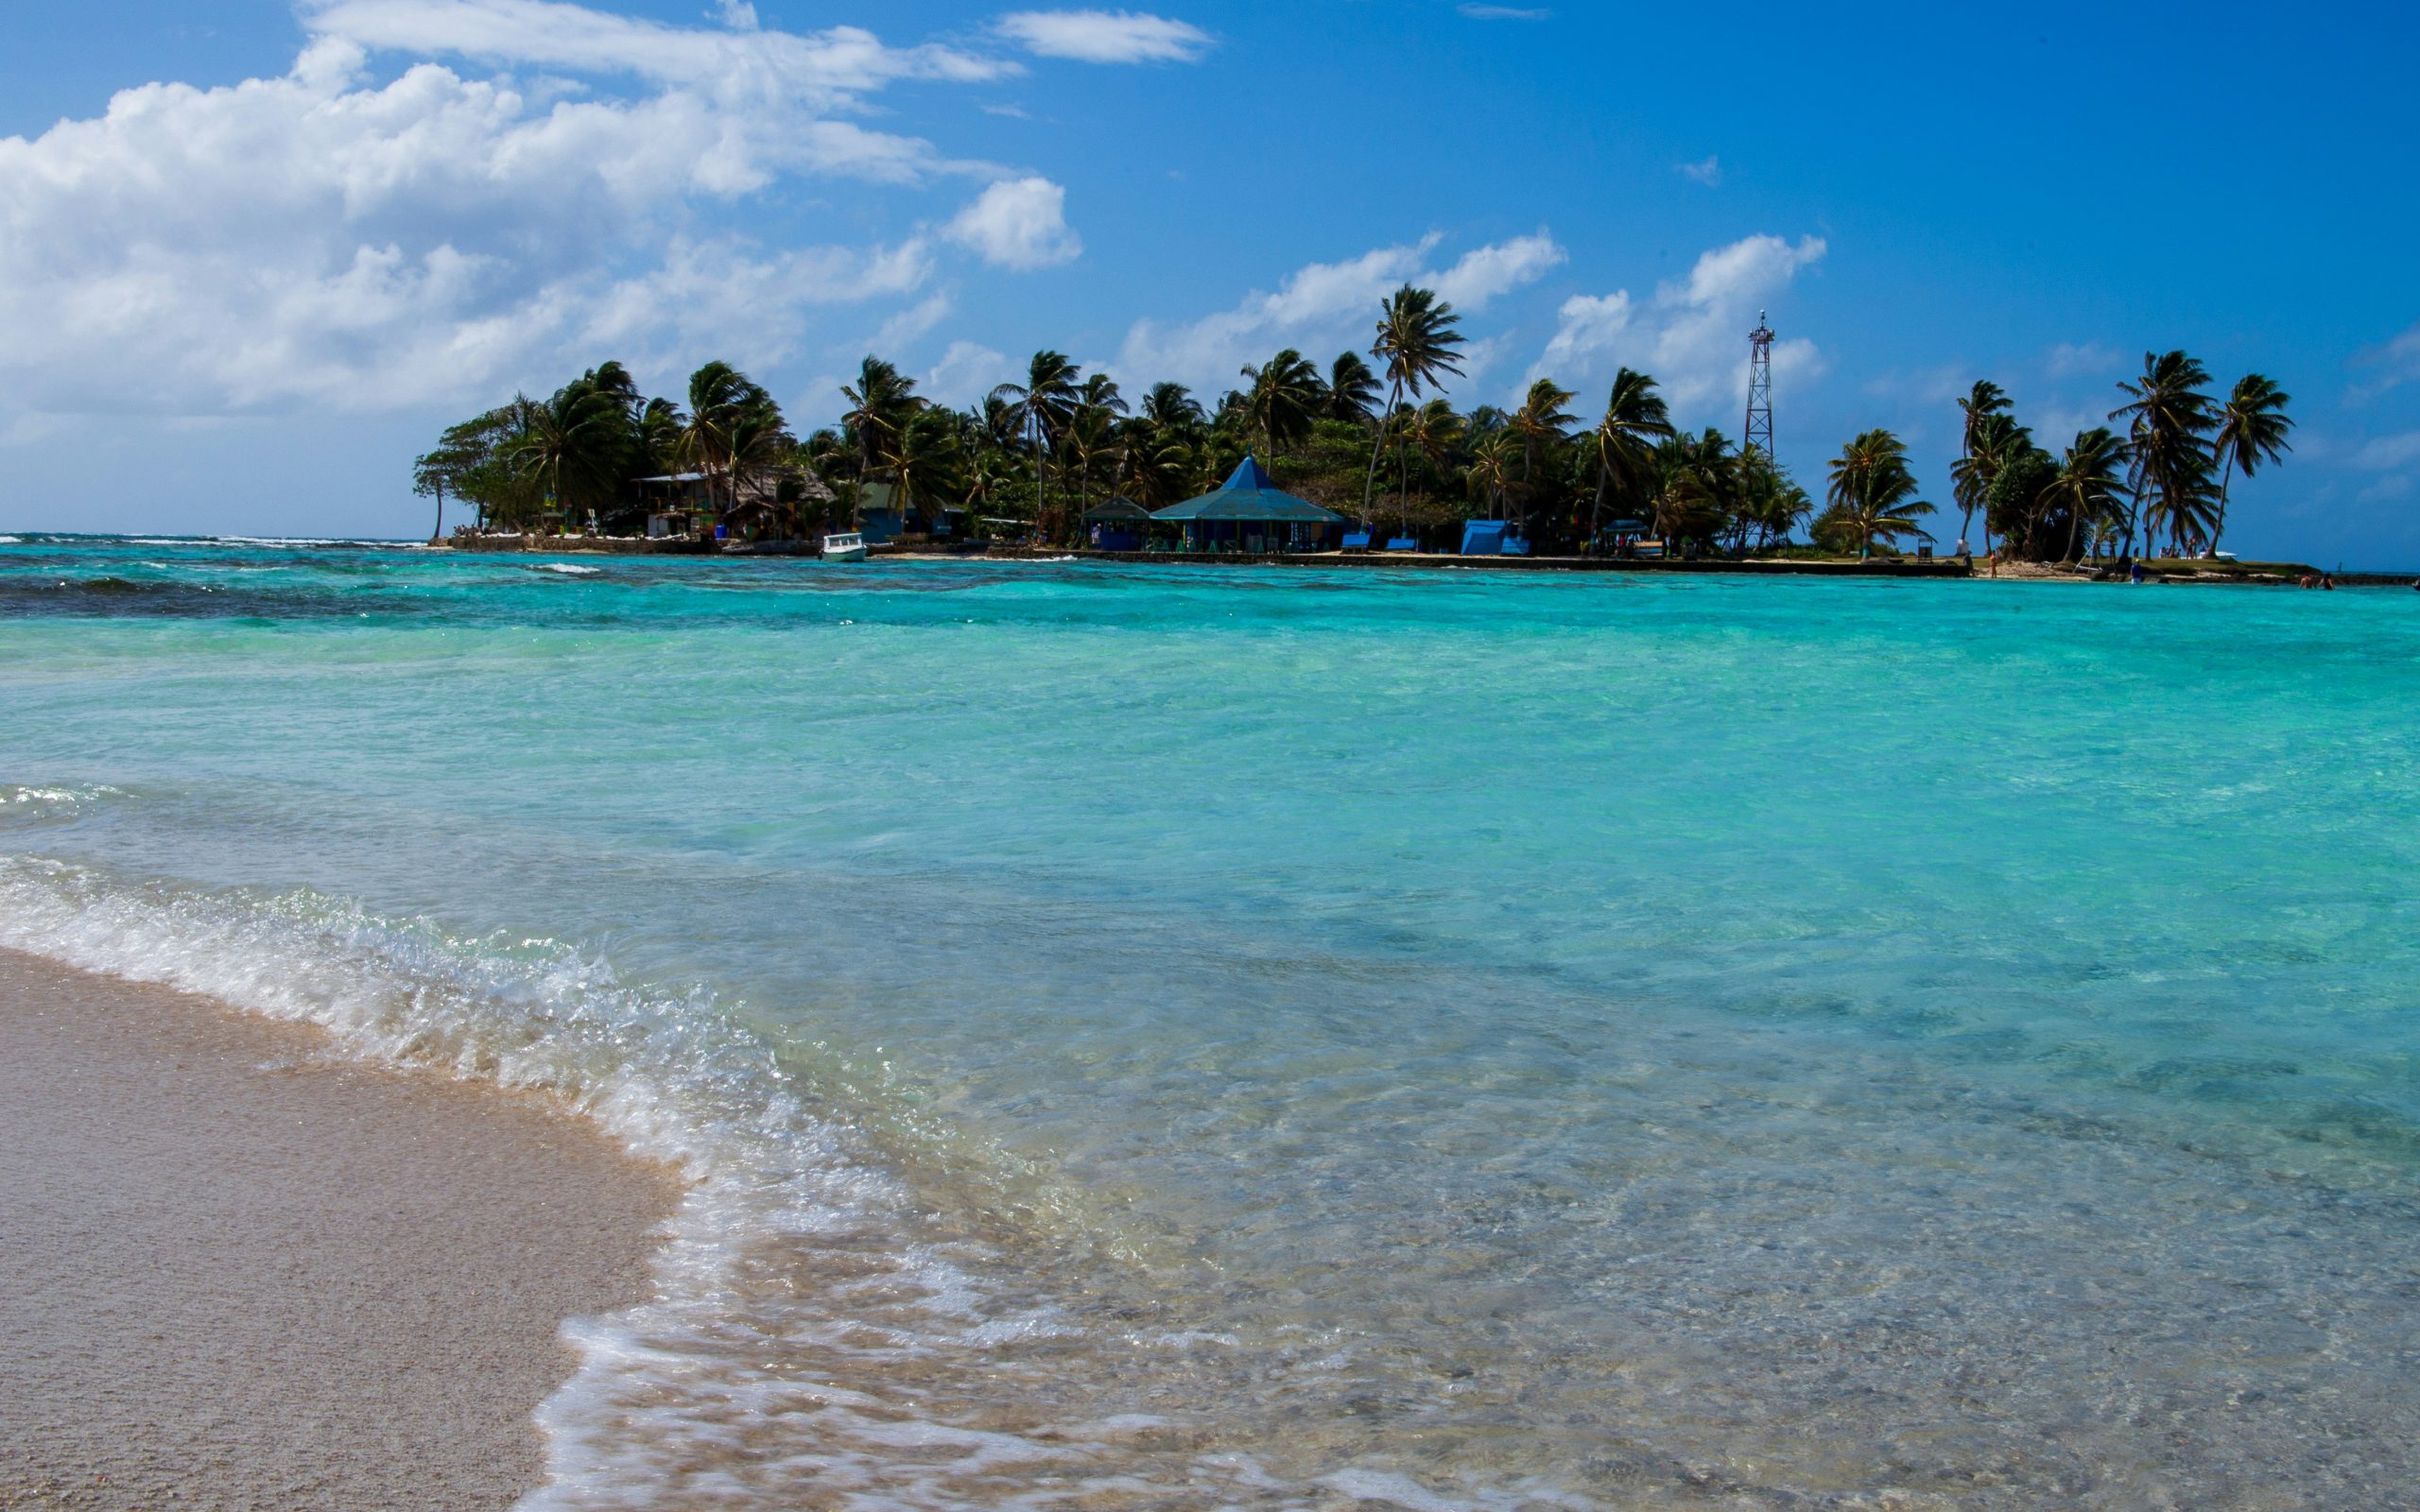 discover the beauty of the caribbean sea with its crystal-clear waters, stunning marine life, and picture-perfect beaches. plan your next tropical getaway to this breathtaking destination.